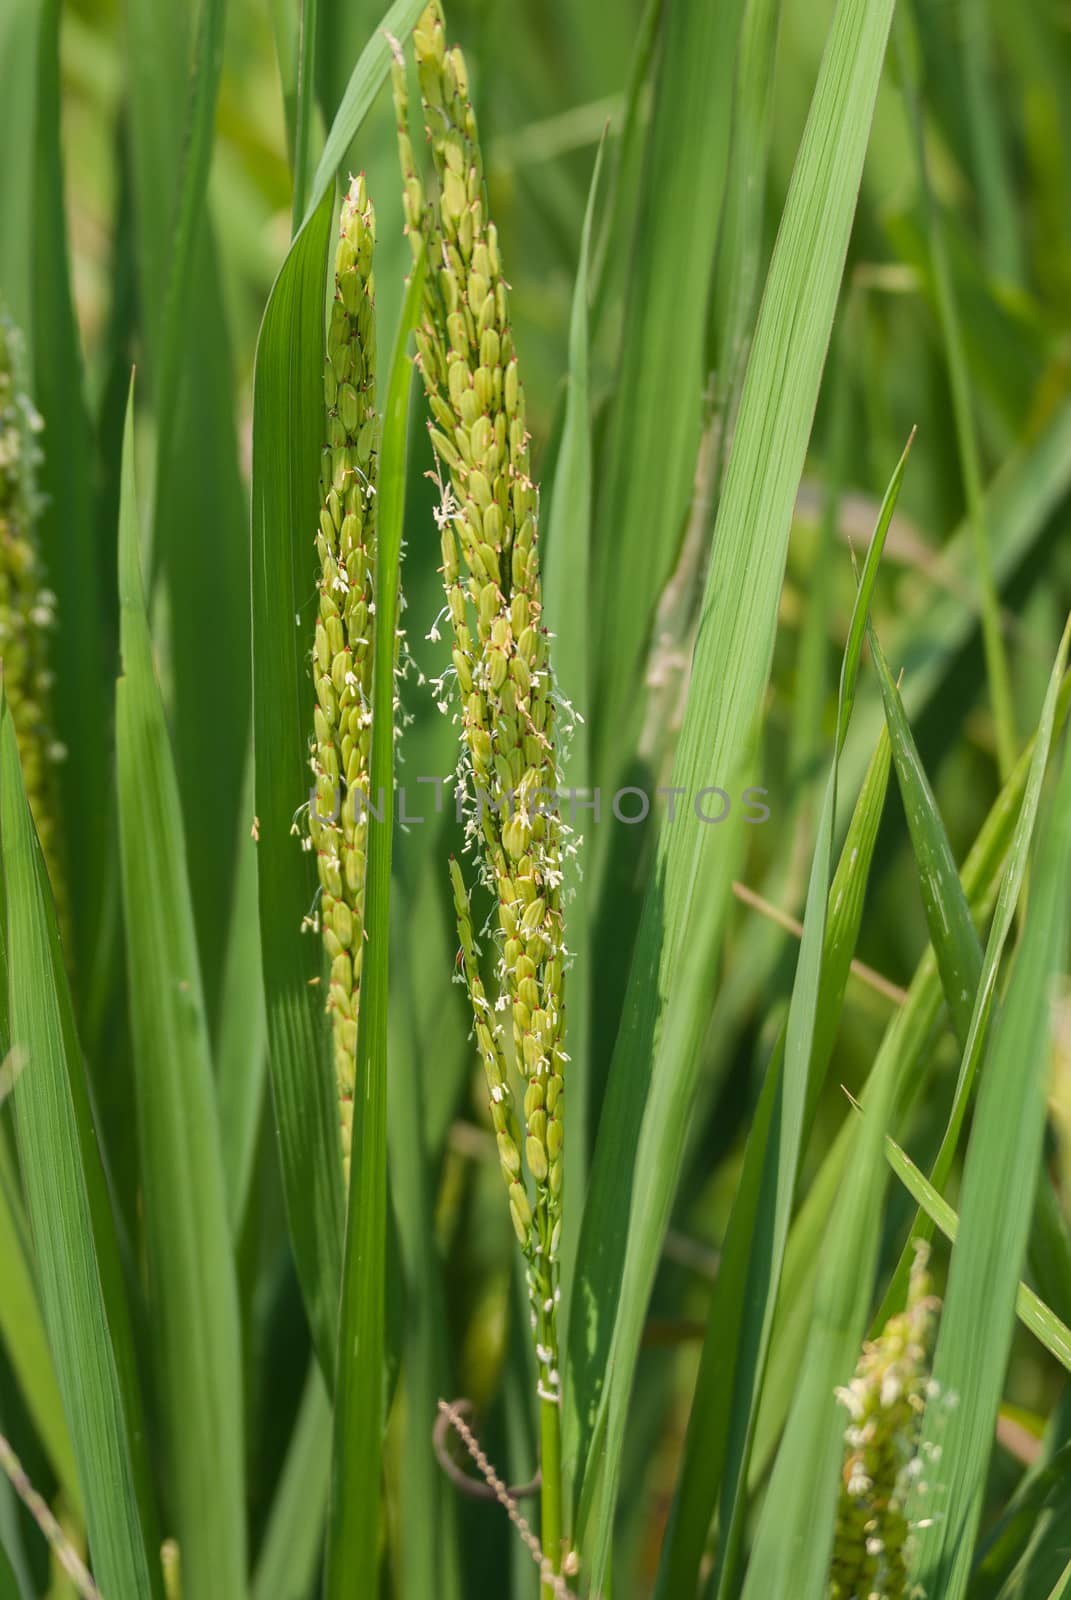 Focus on riping rice stalks, kernels and flower clearly visible. by Claudine